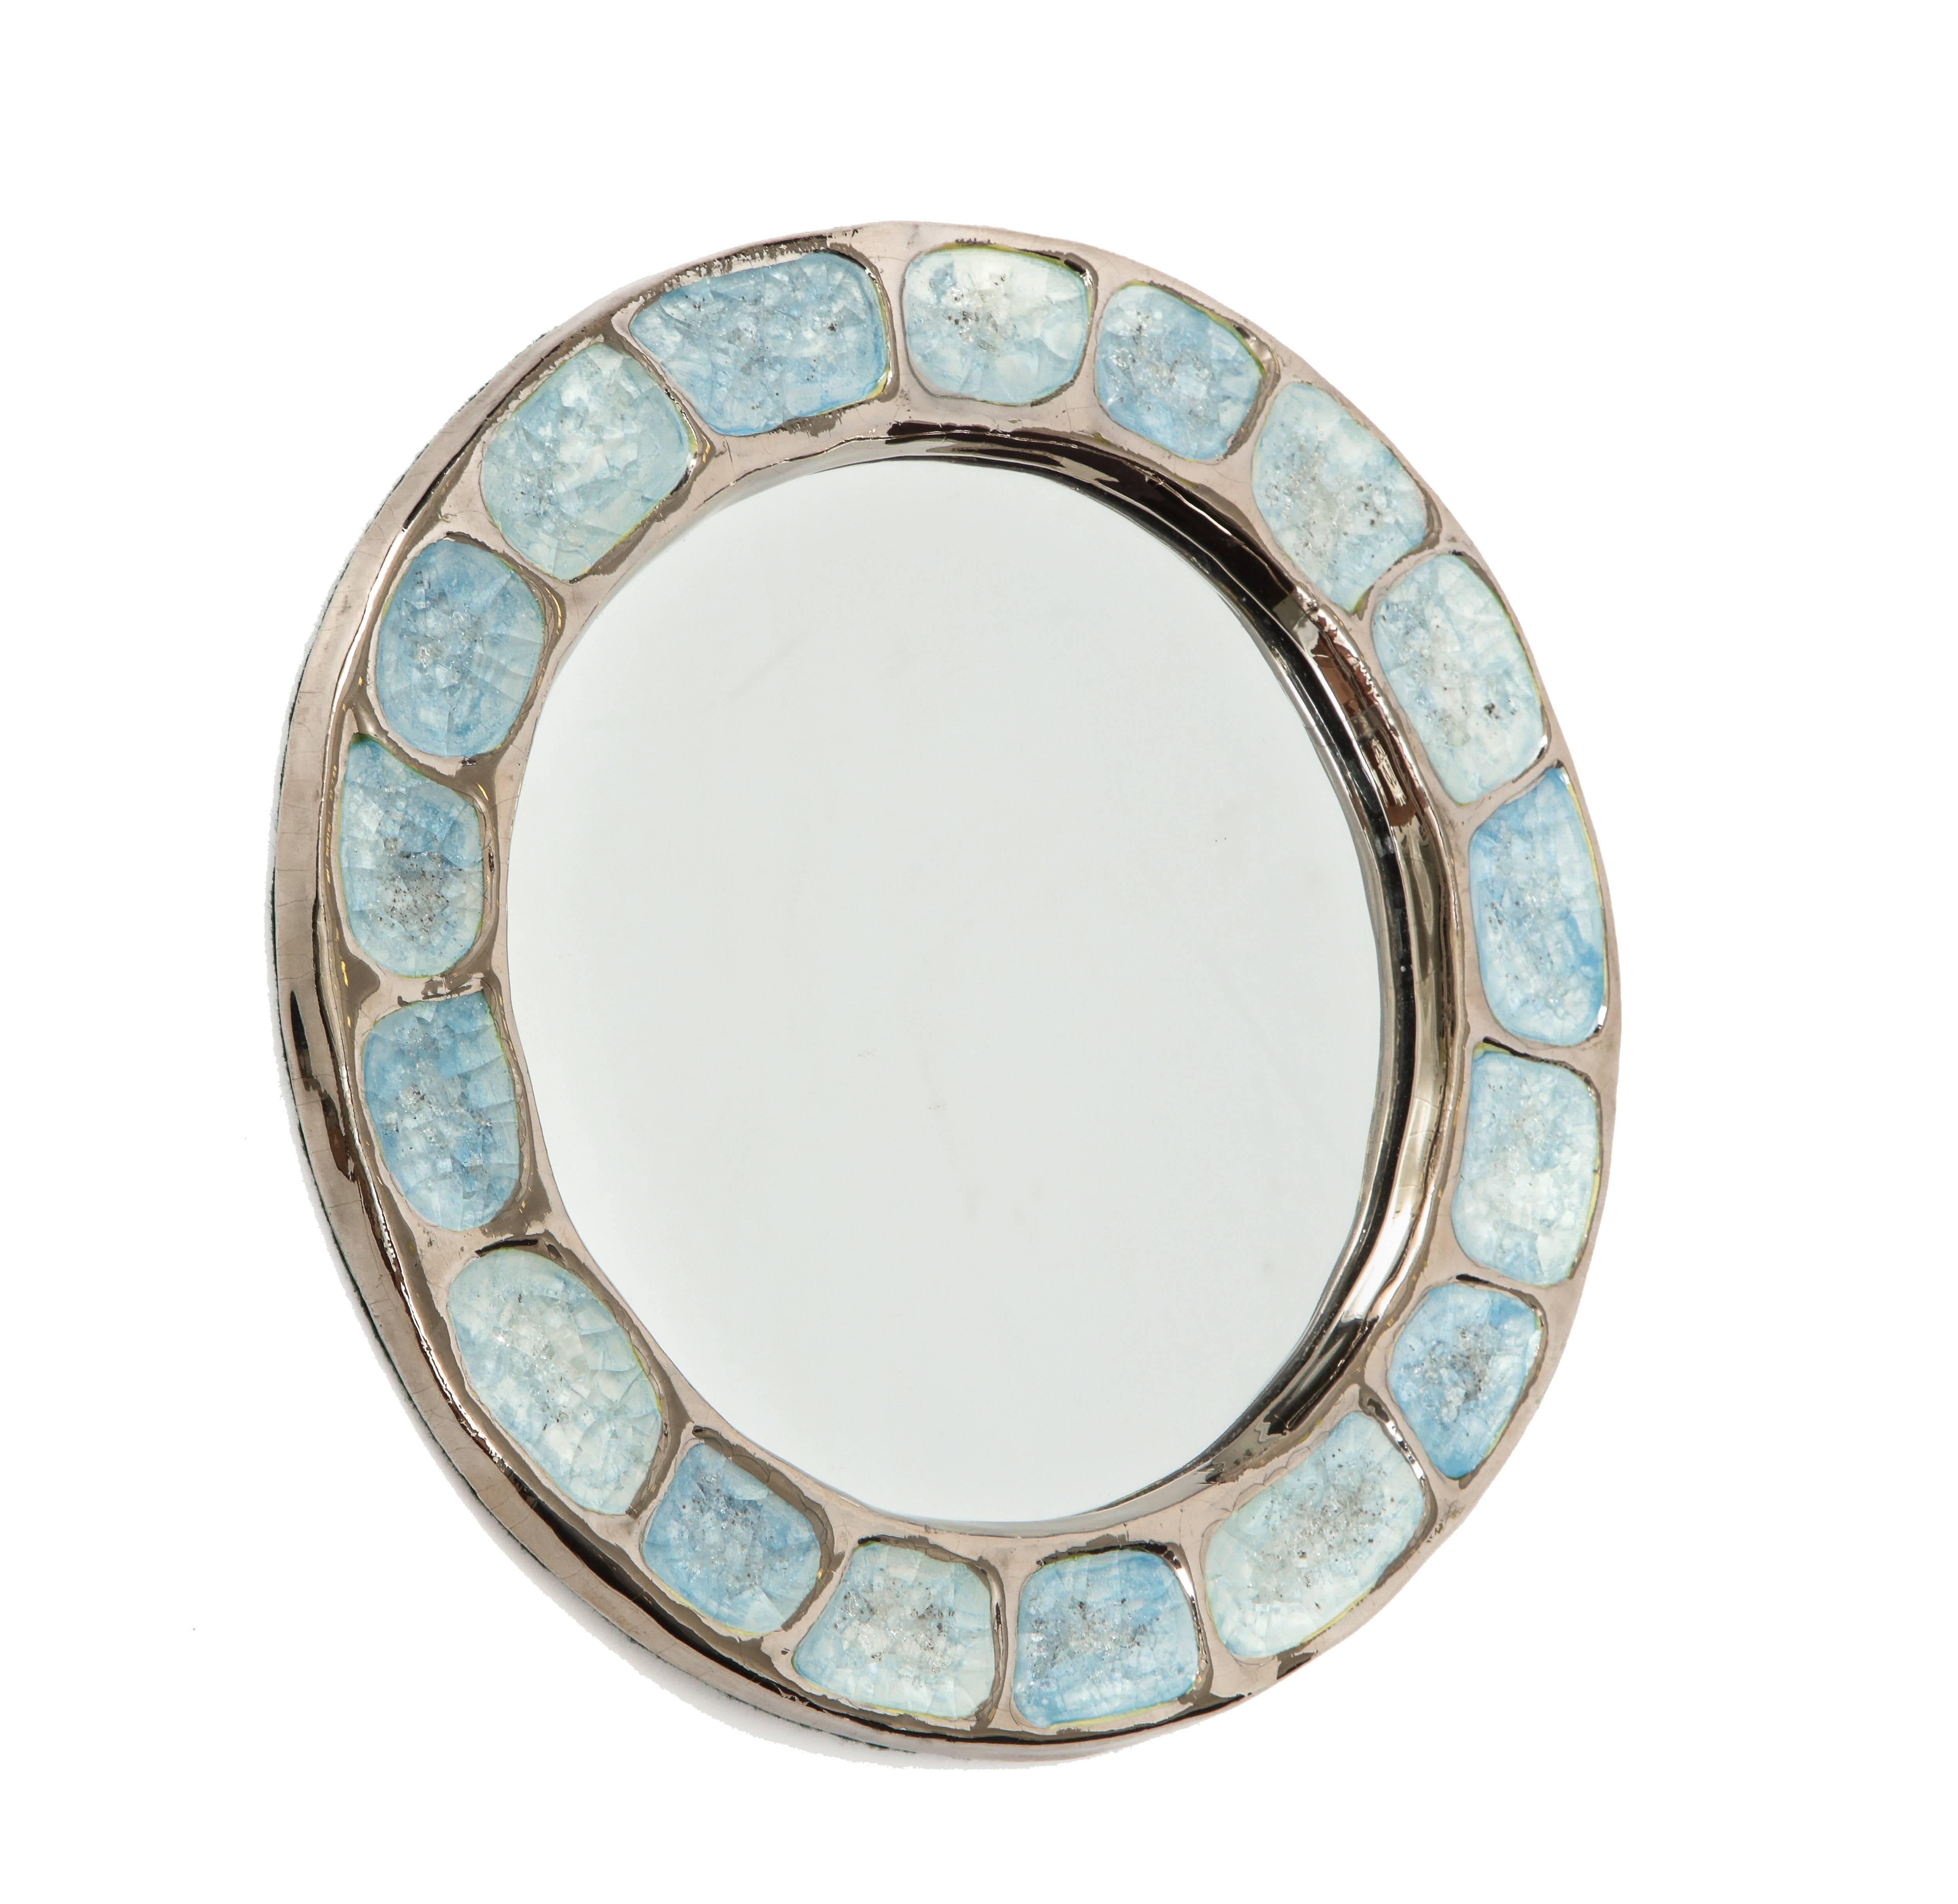 Francois Lembo ceramic mirror metallic silver chrome blue round, France, 1970s. Circular mirror with light blue fused glass decoration contrasted by metallic silver glaze. Felt back.